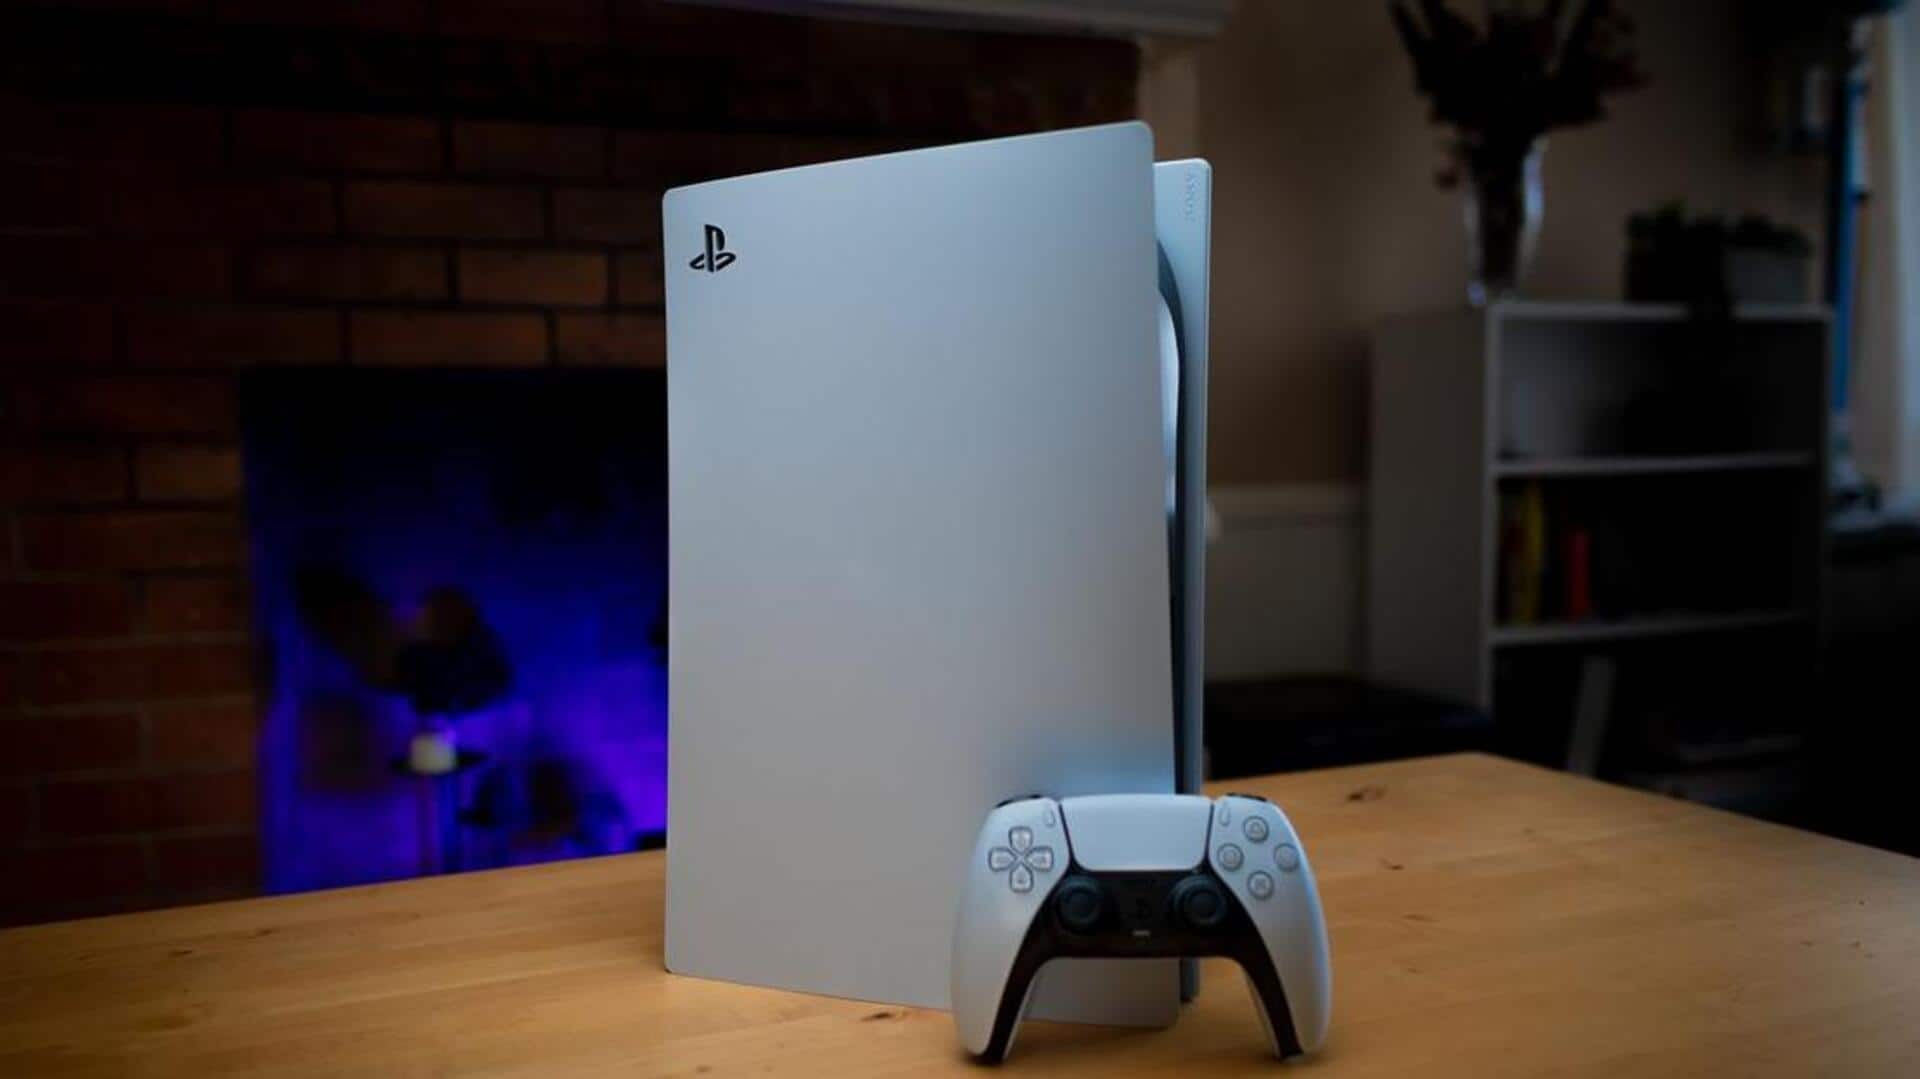 Sony PlayStation 5 Skilled full specs leaked ahead of launch